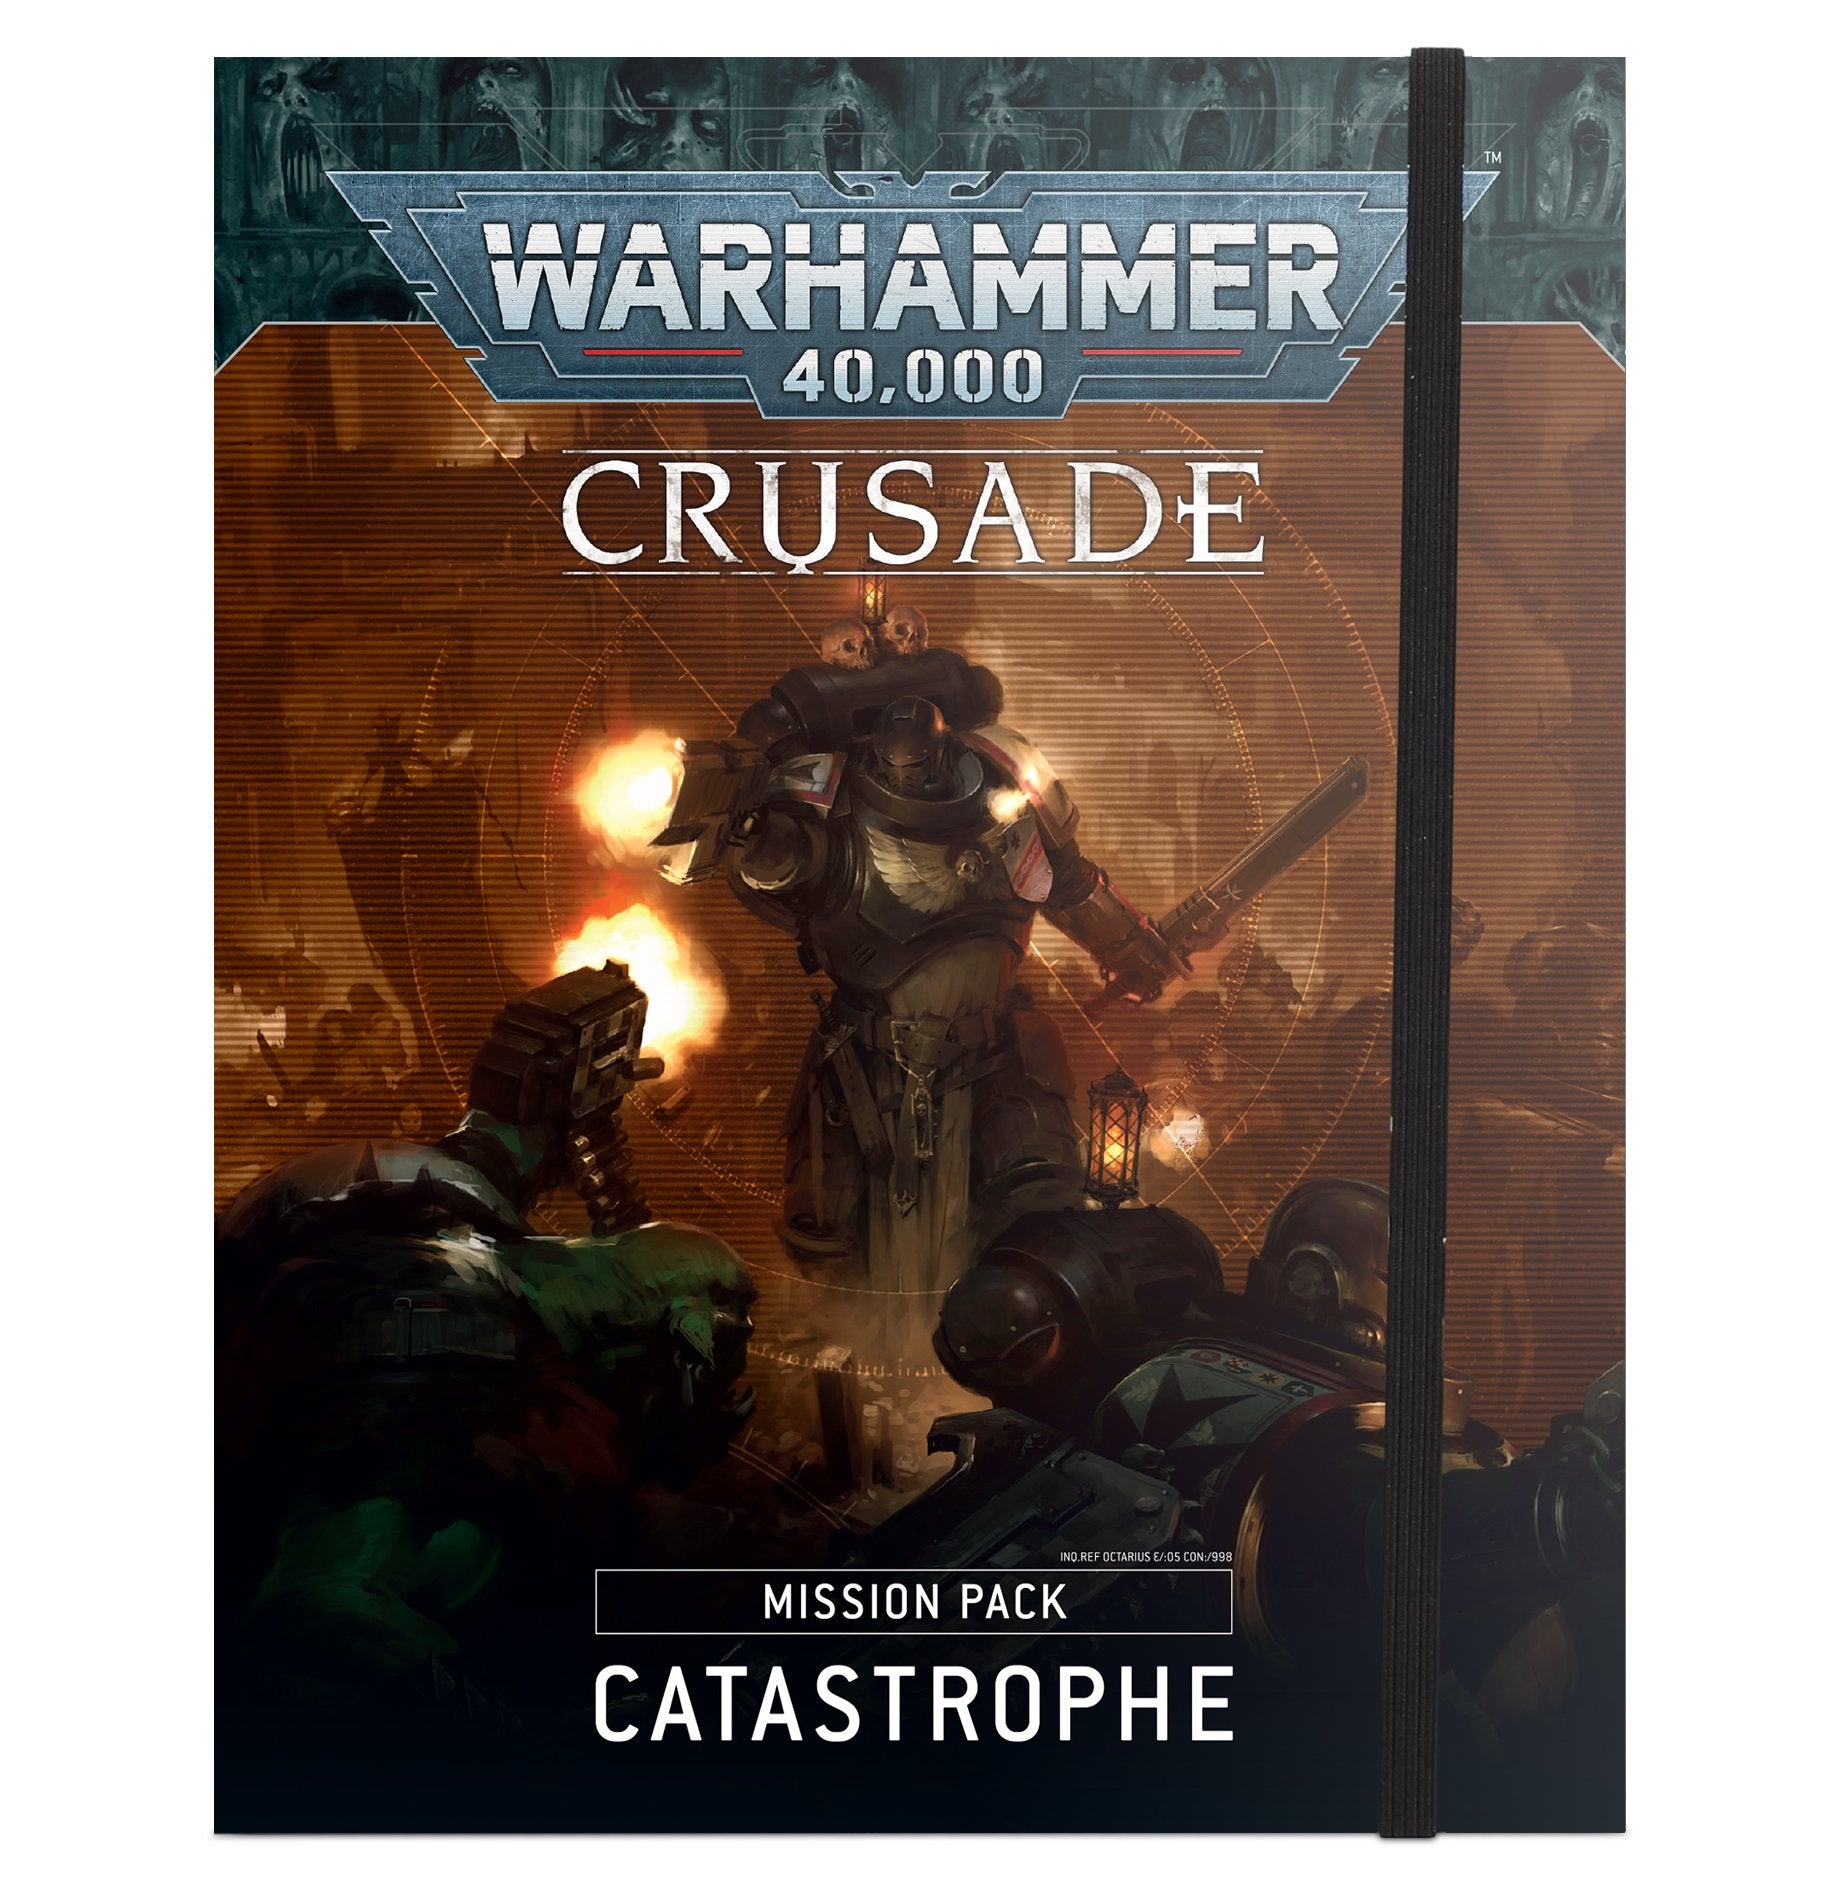 Warhammer 40,000: Crusade: Mission Pack: Catastrophe